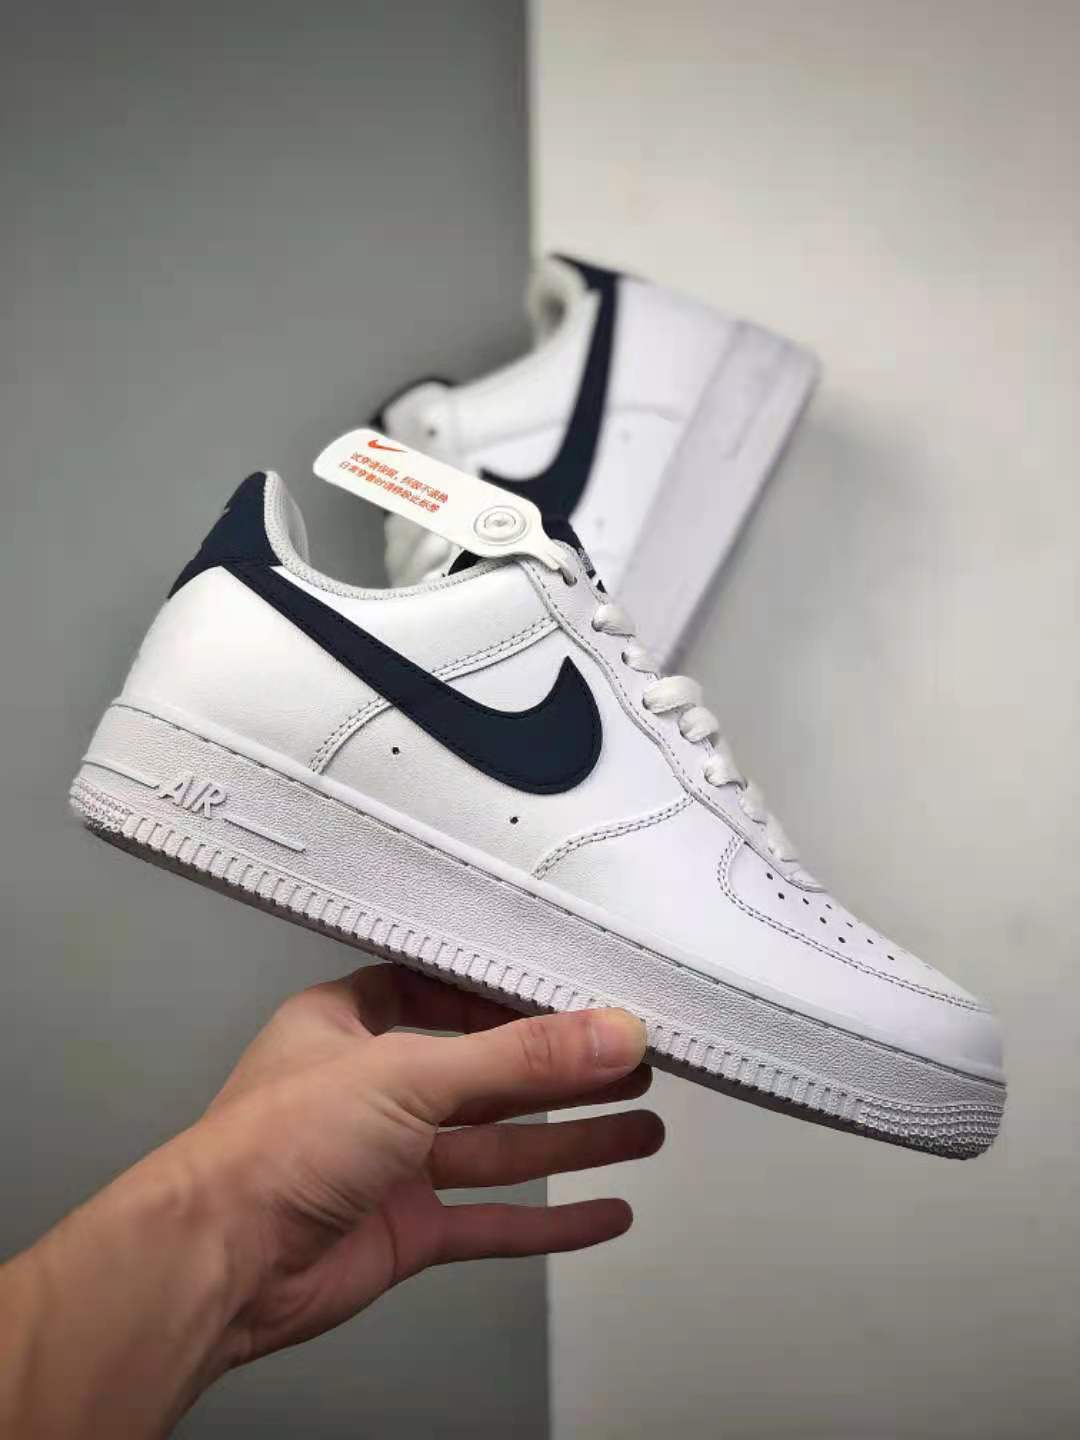 Nike Air Force 1 '07 'Midnight Navy' CJ1607-100 | Stylish and sleek sneakers